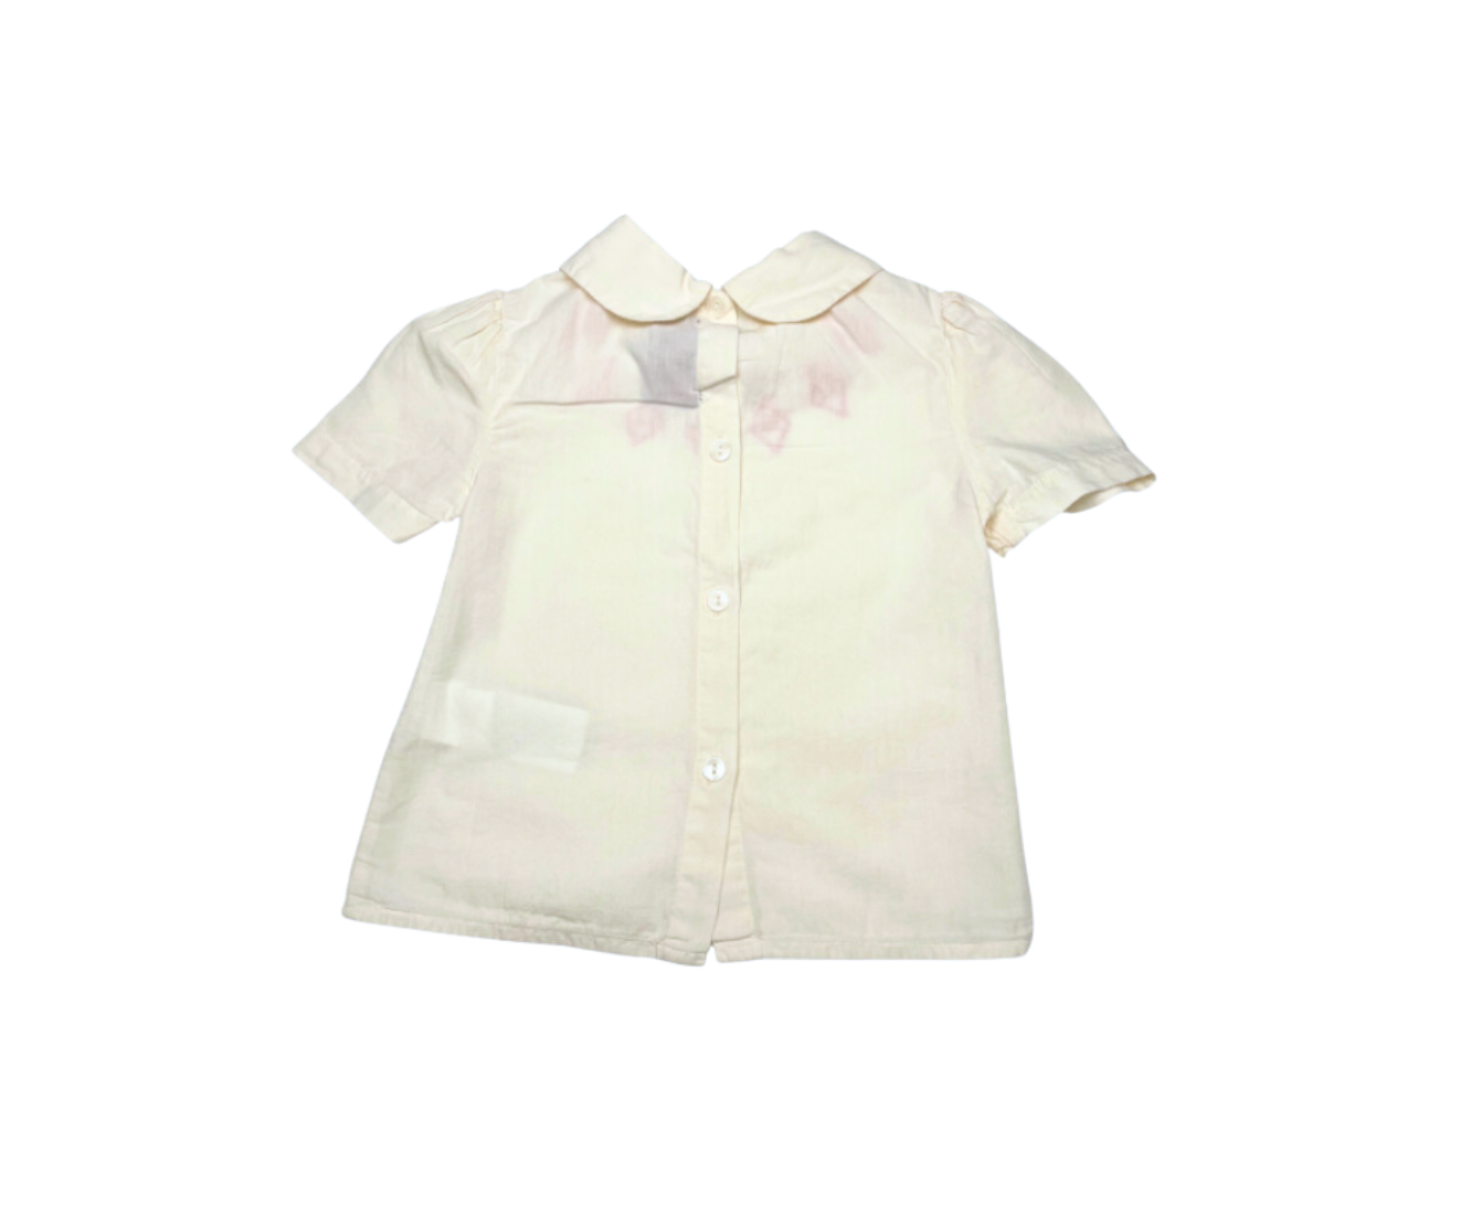 THE ANIMALS OBSERVATORY - Blouse blanche avec broderie - 2 ans